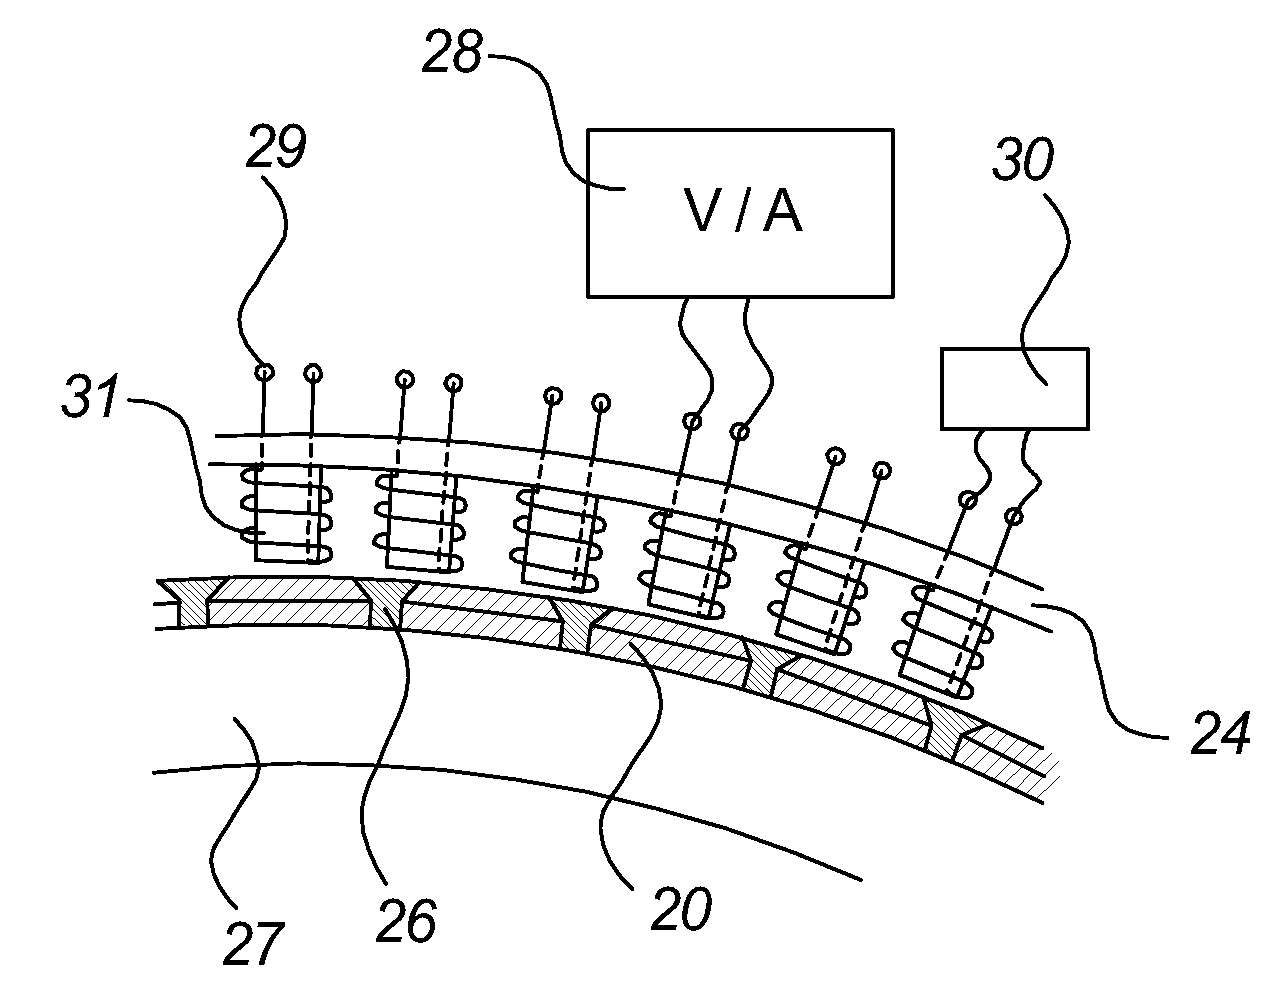 Method For Establishing A Wind Turbine Generator With One Or More Permanent Magnet (PM) Rotors, Wind Turbine Nacelle And Wind Turbine